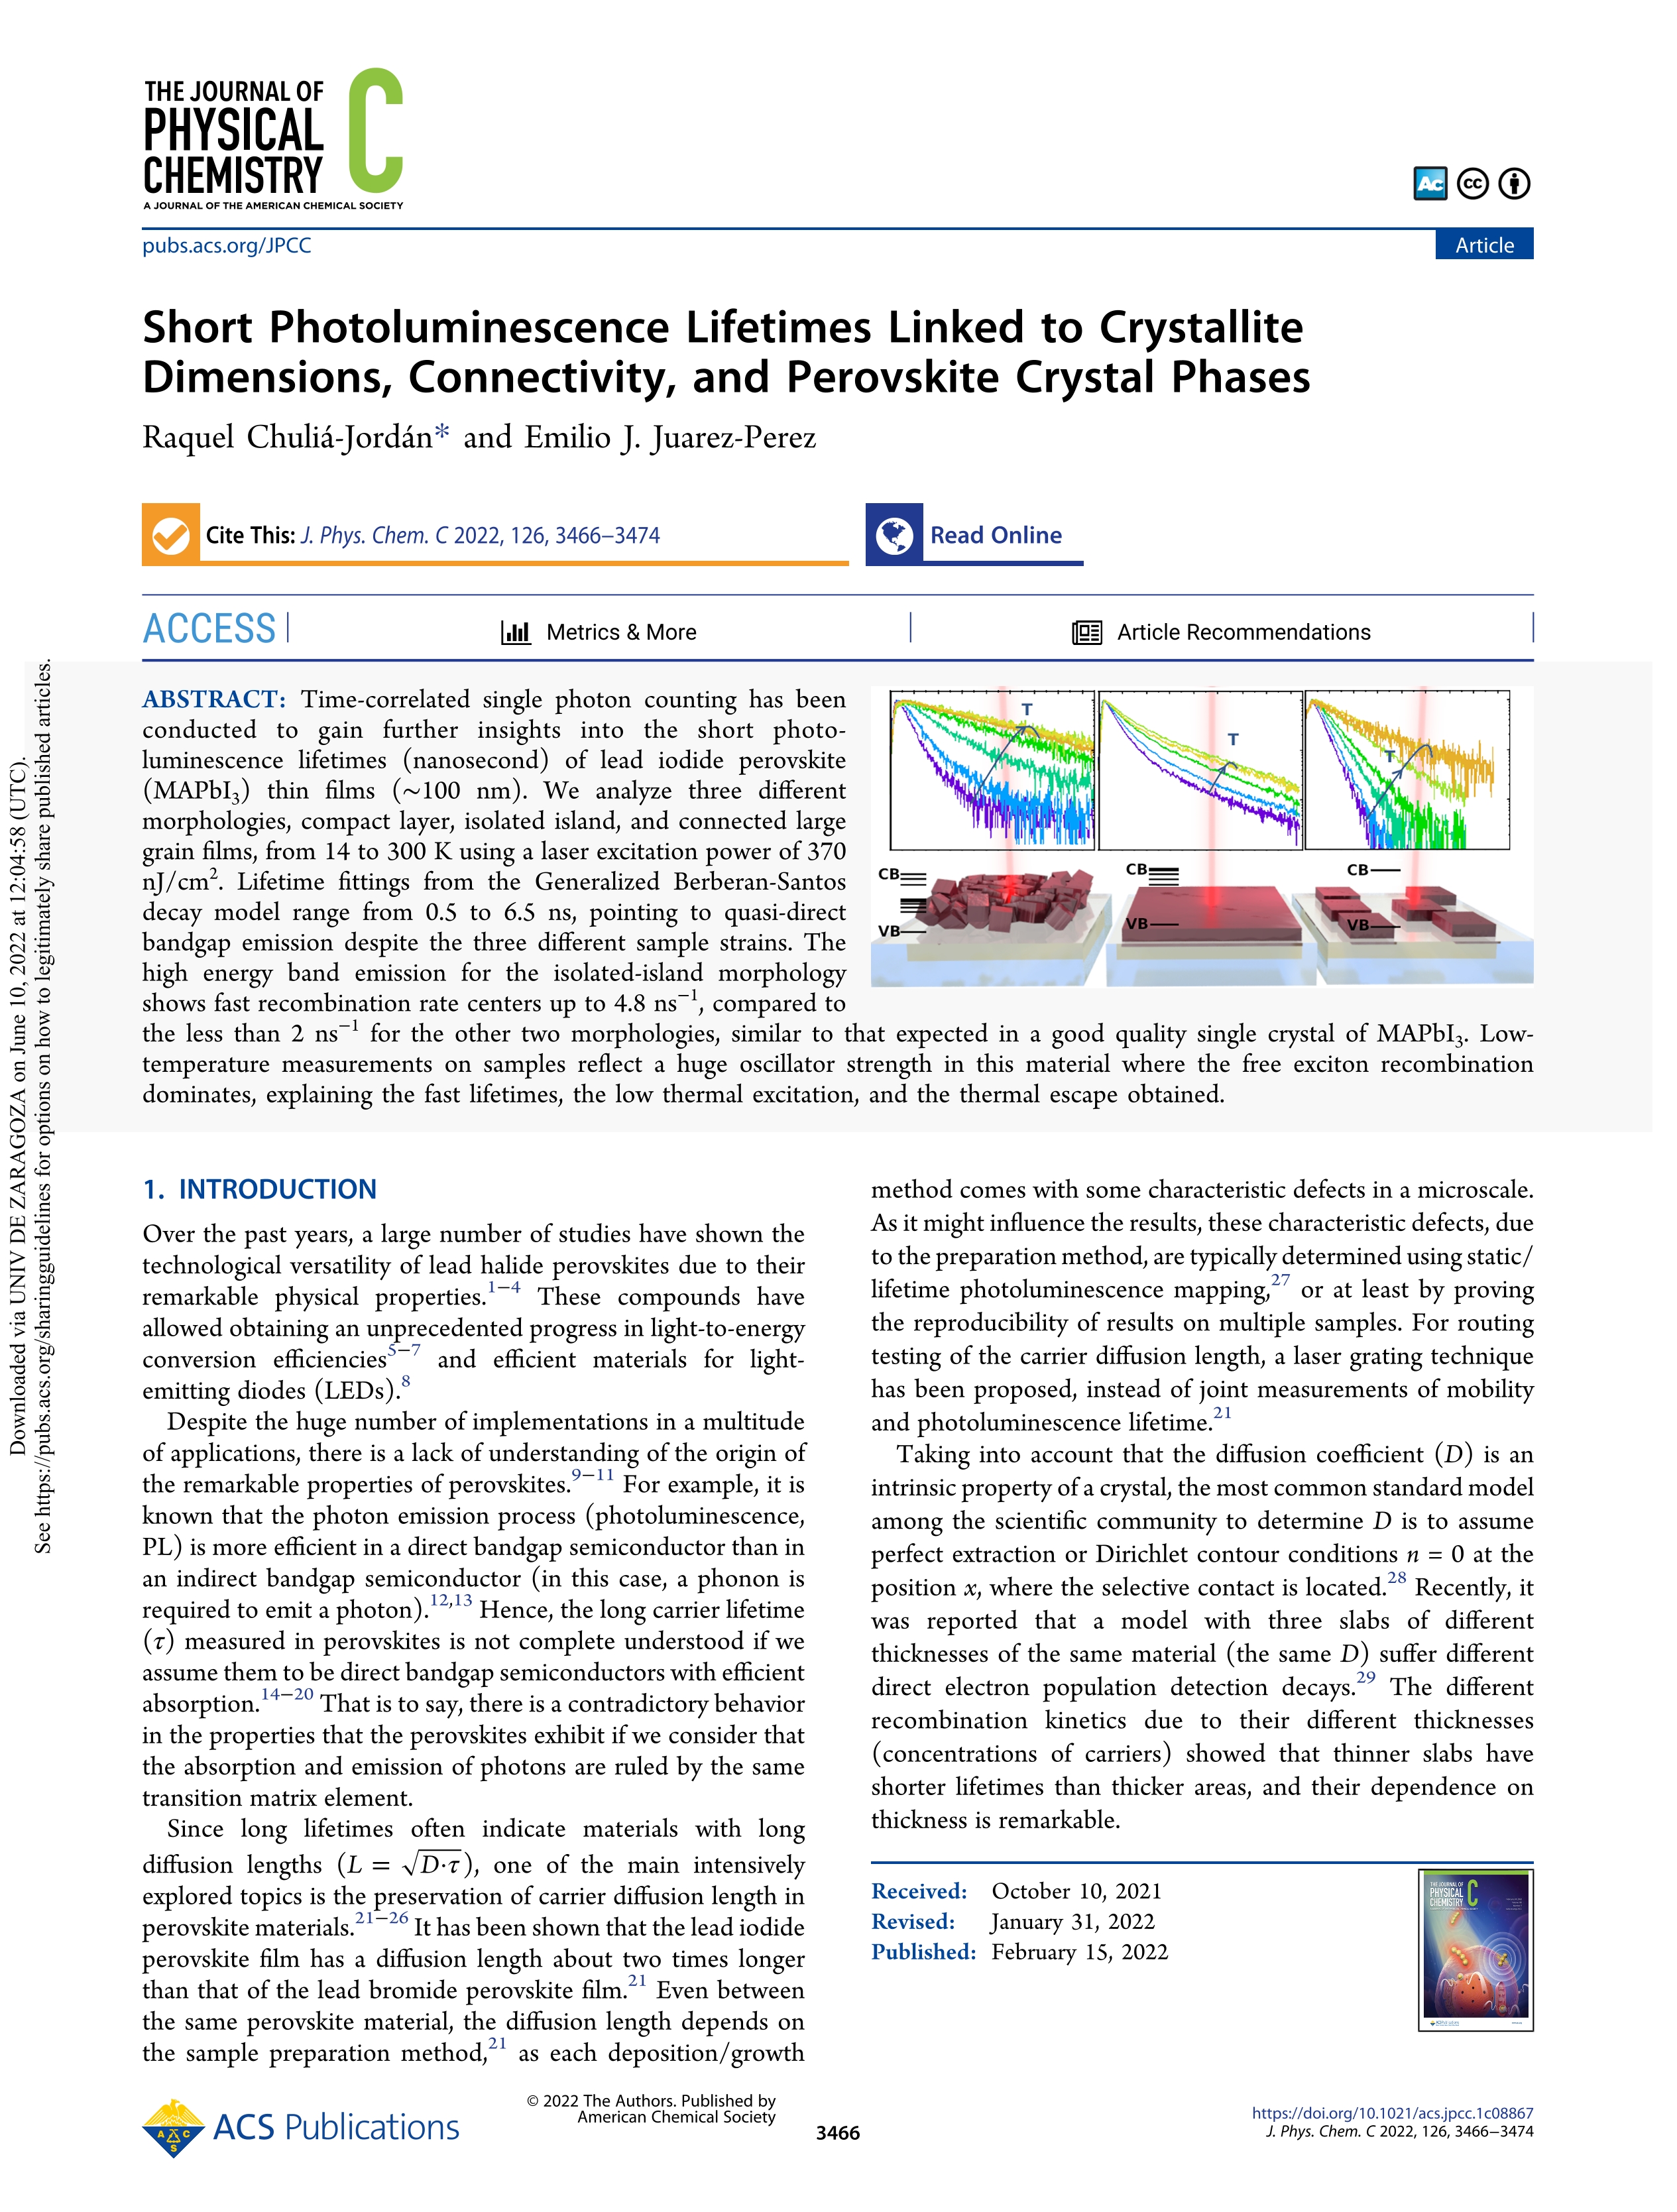 Short Photoluminescence Lifetimes Linked to Crystallite Dimensions, Connectivity, and Perovskite Crystal Phases